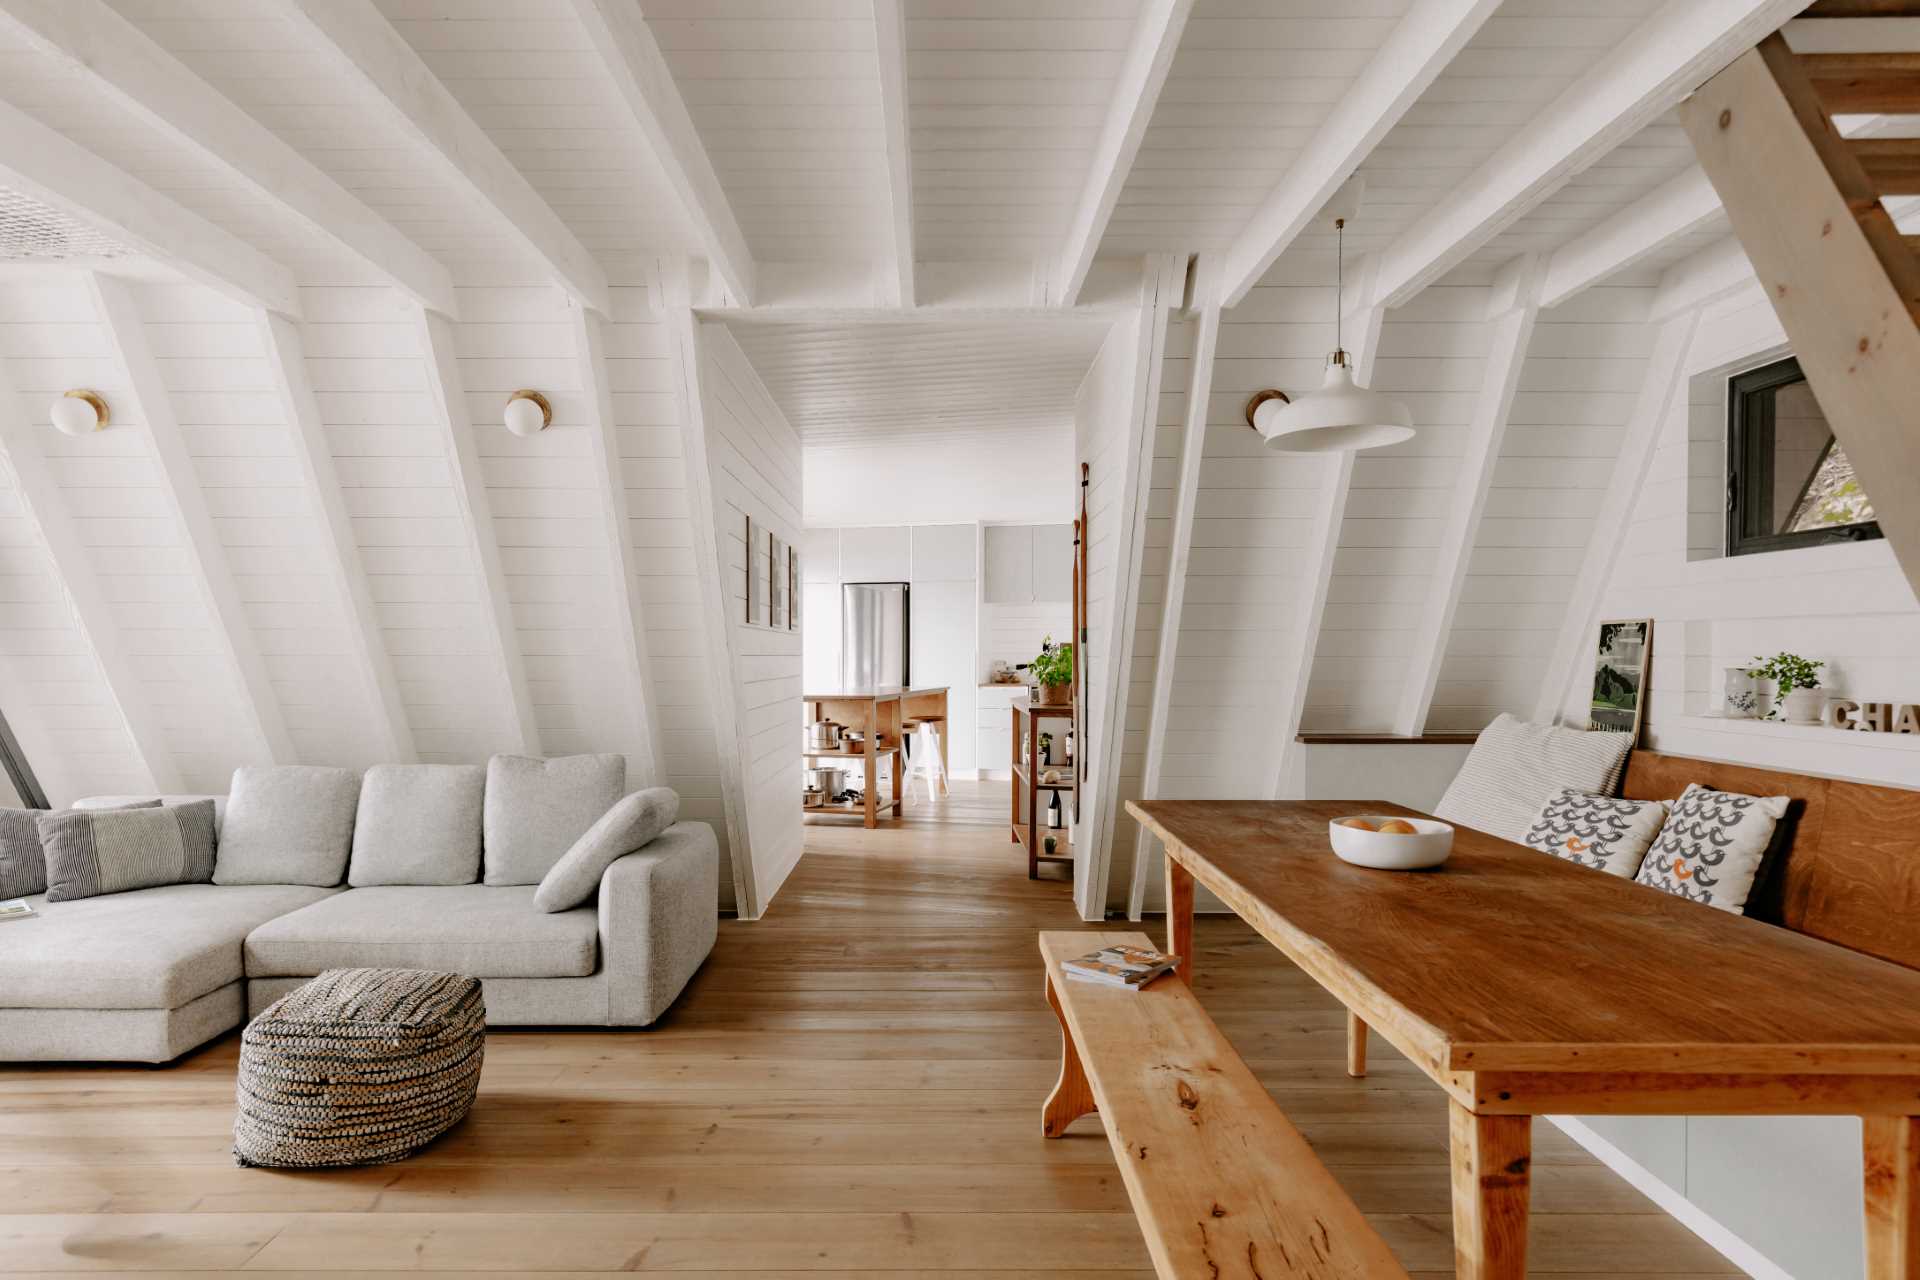 A updated A-Frame cabin with a white interior and wood floors.